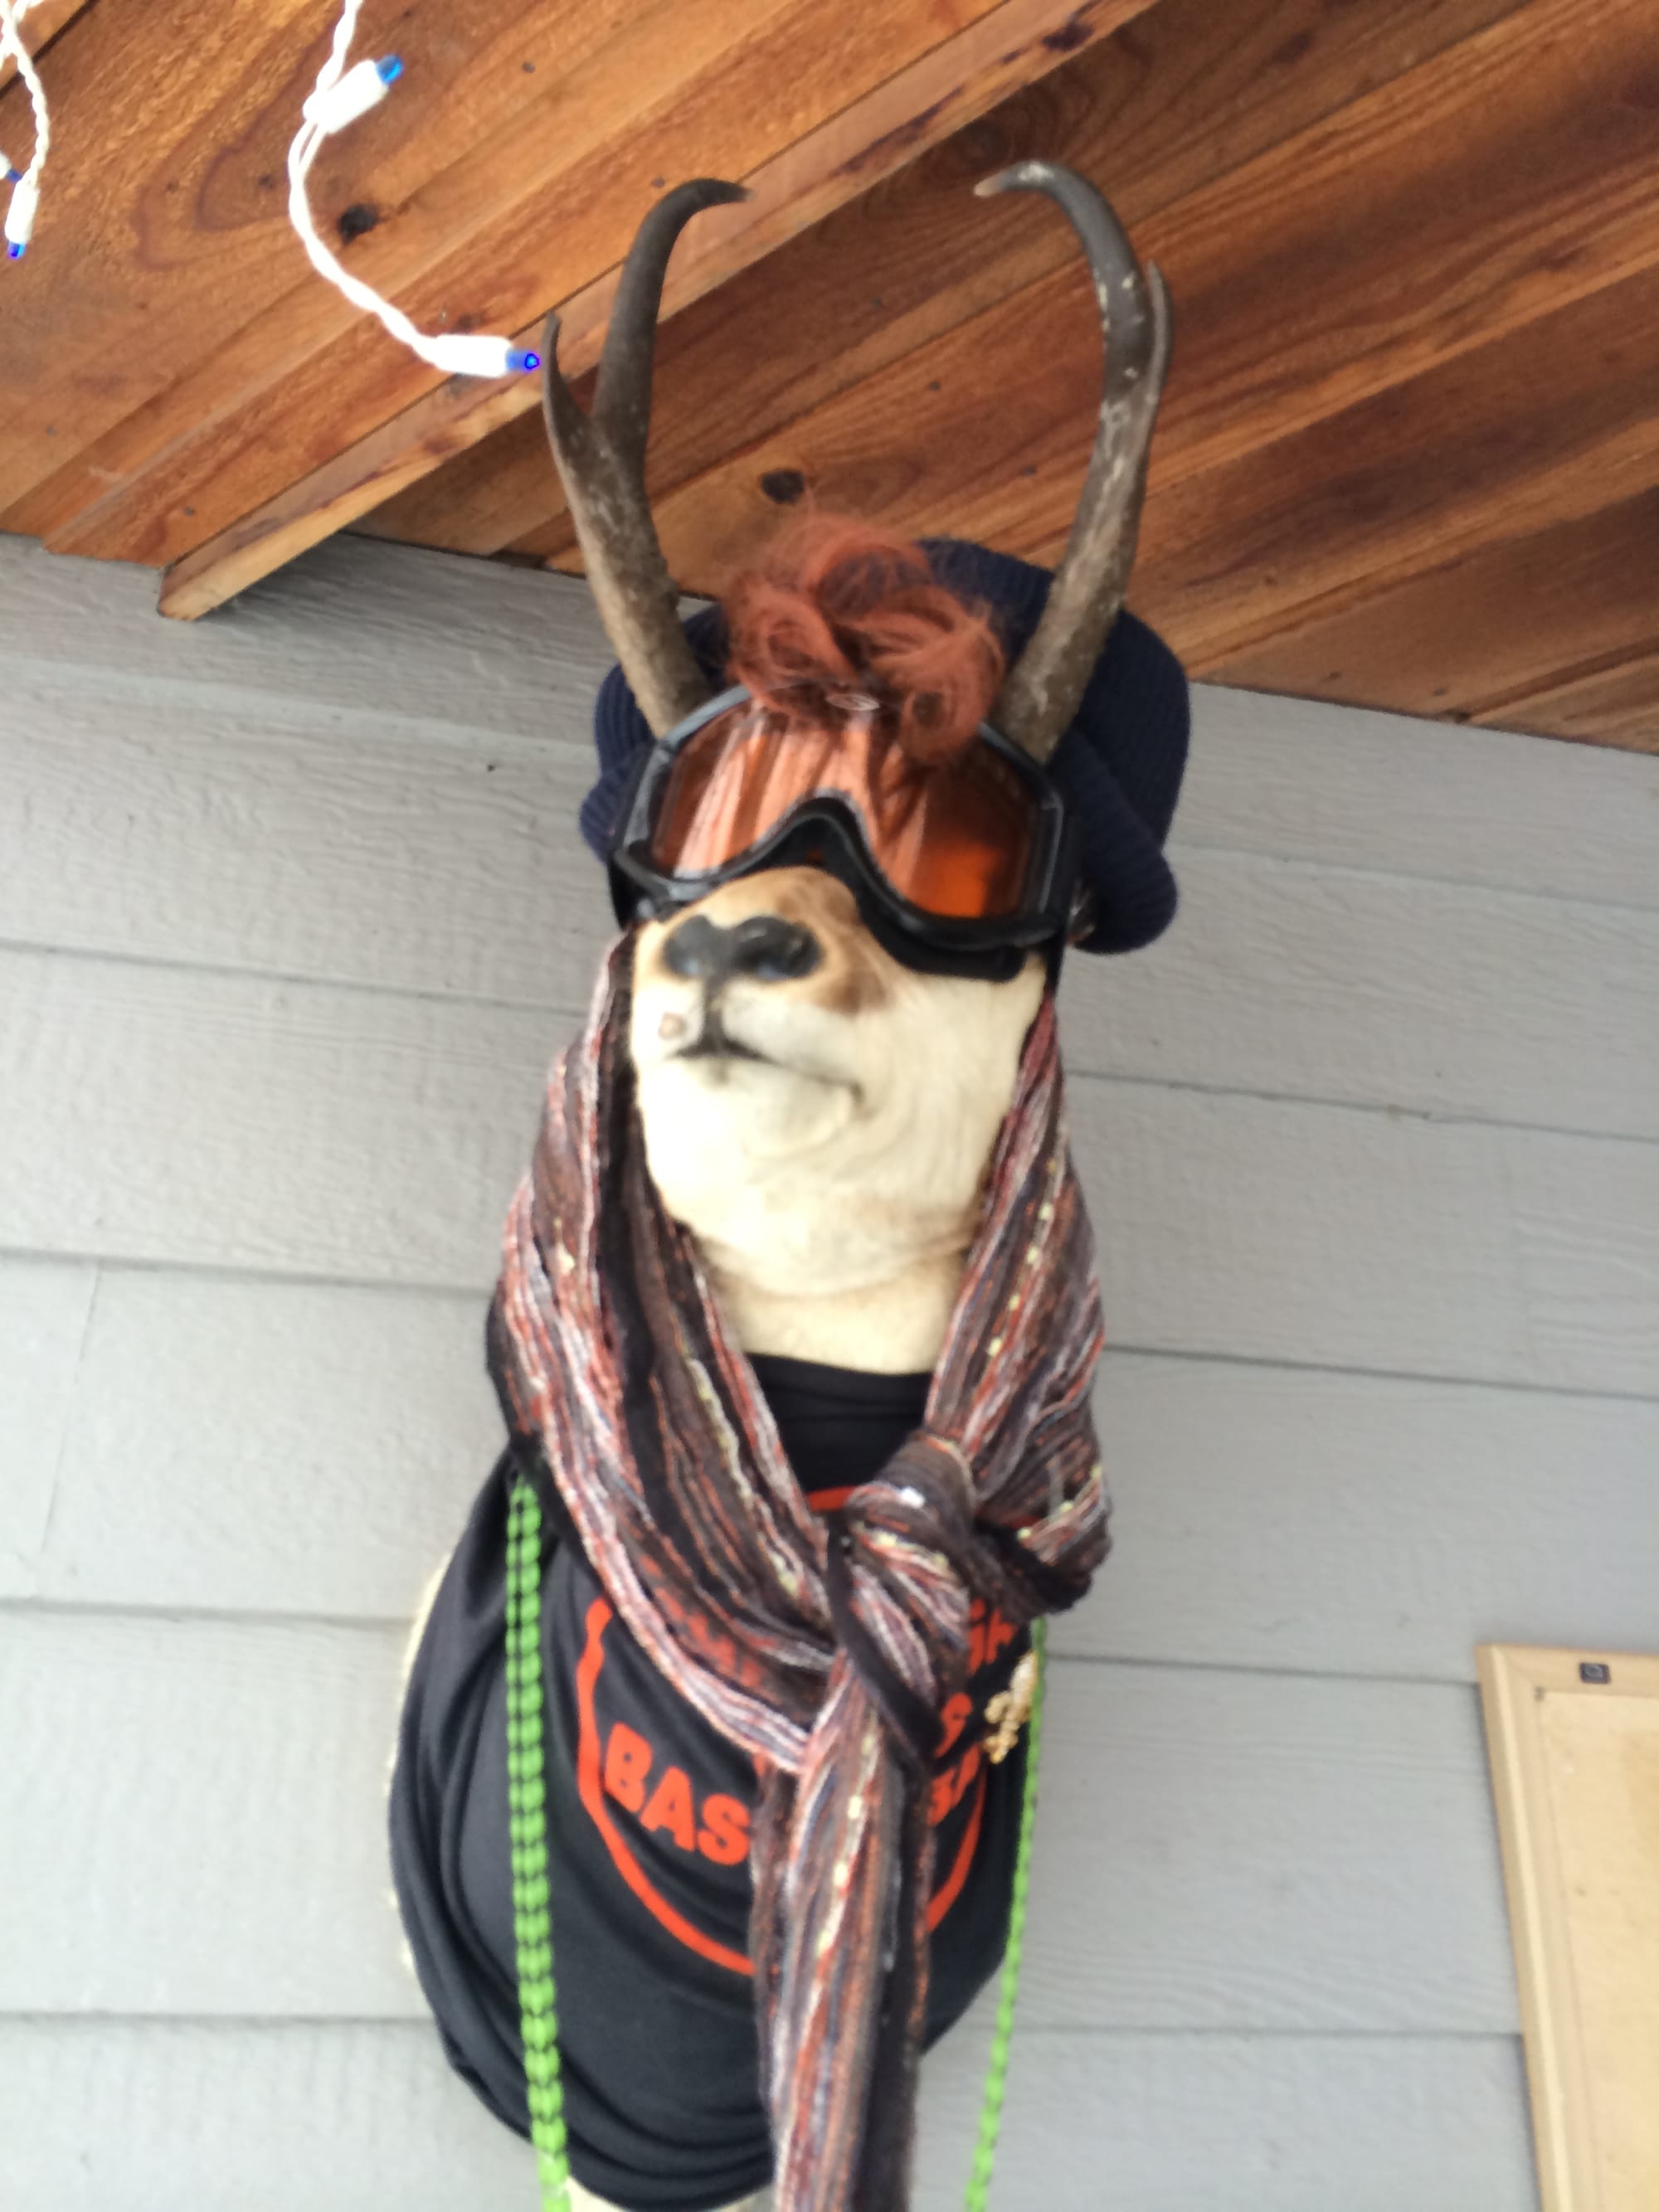 Photo by Author — decor at theBlue Moon Bakery, Big Sky, Montana — I like the outfit